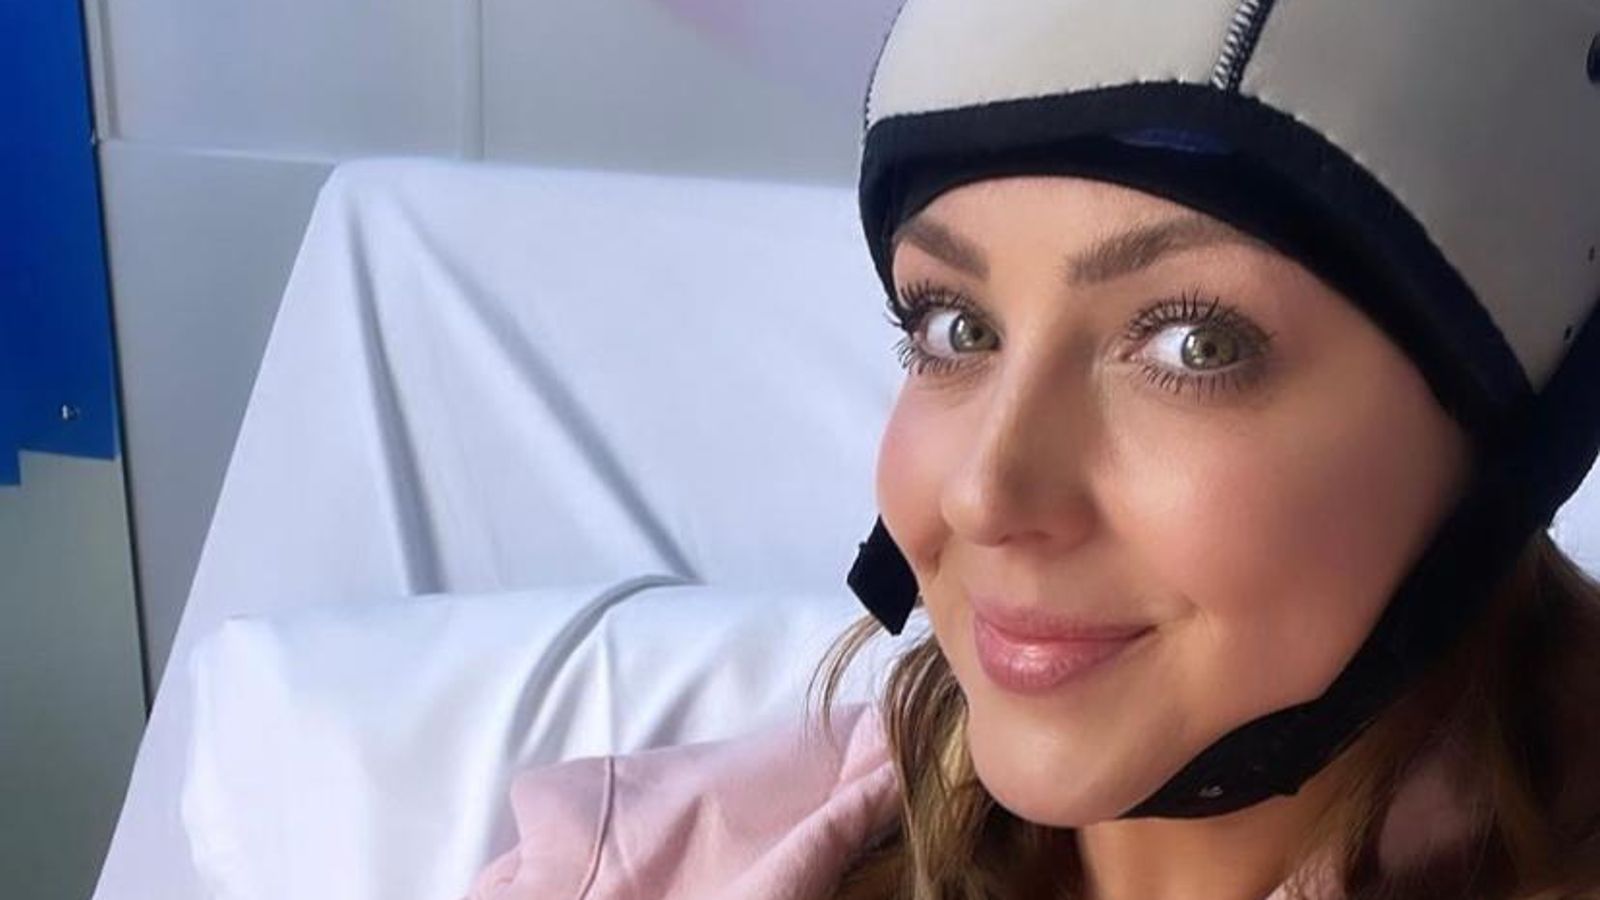 Strictly Come Dancing's Amy Dowden shares 'heartbreak' over cancer treatment hair loss